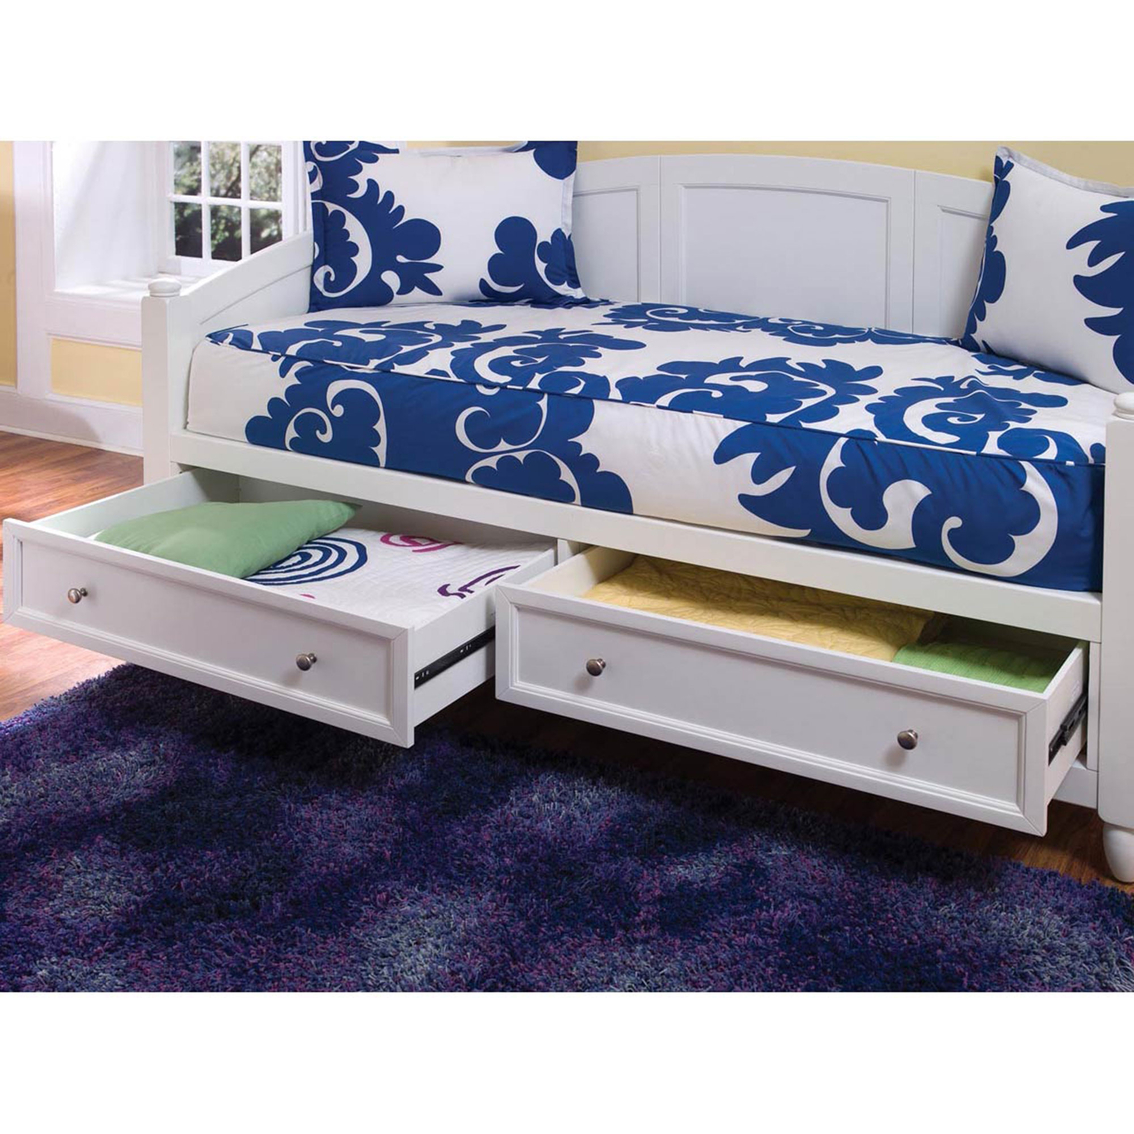 Home Styles Naples Daybed - Image 2 of 2